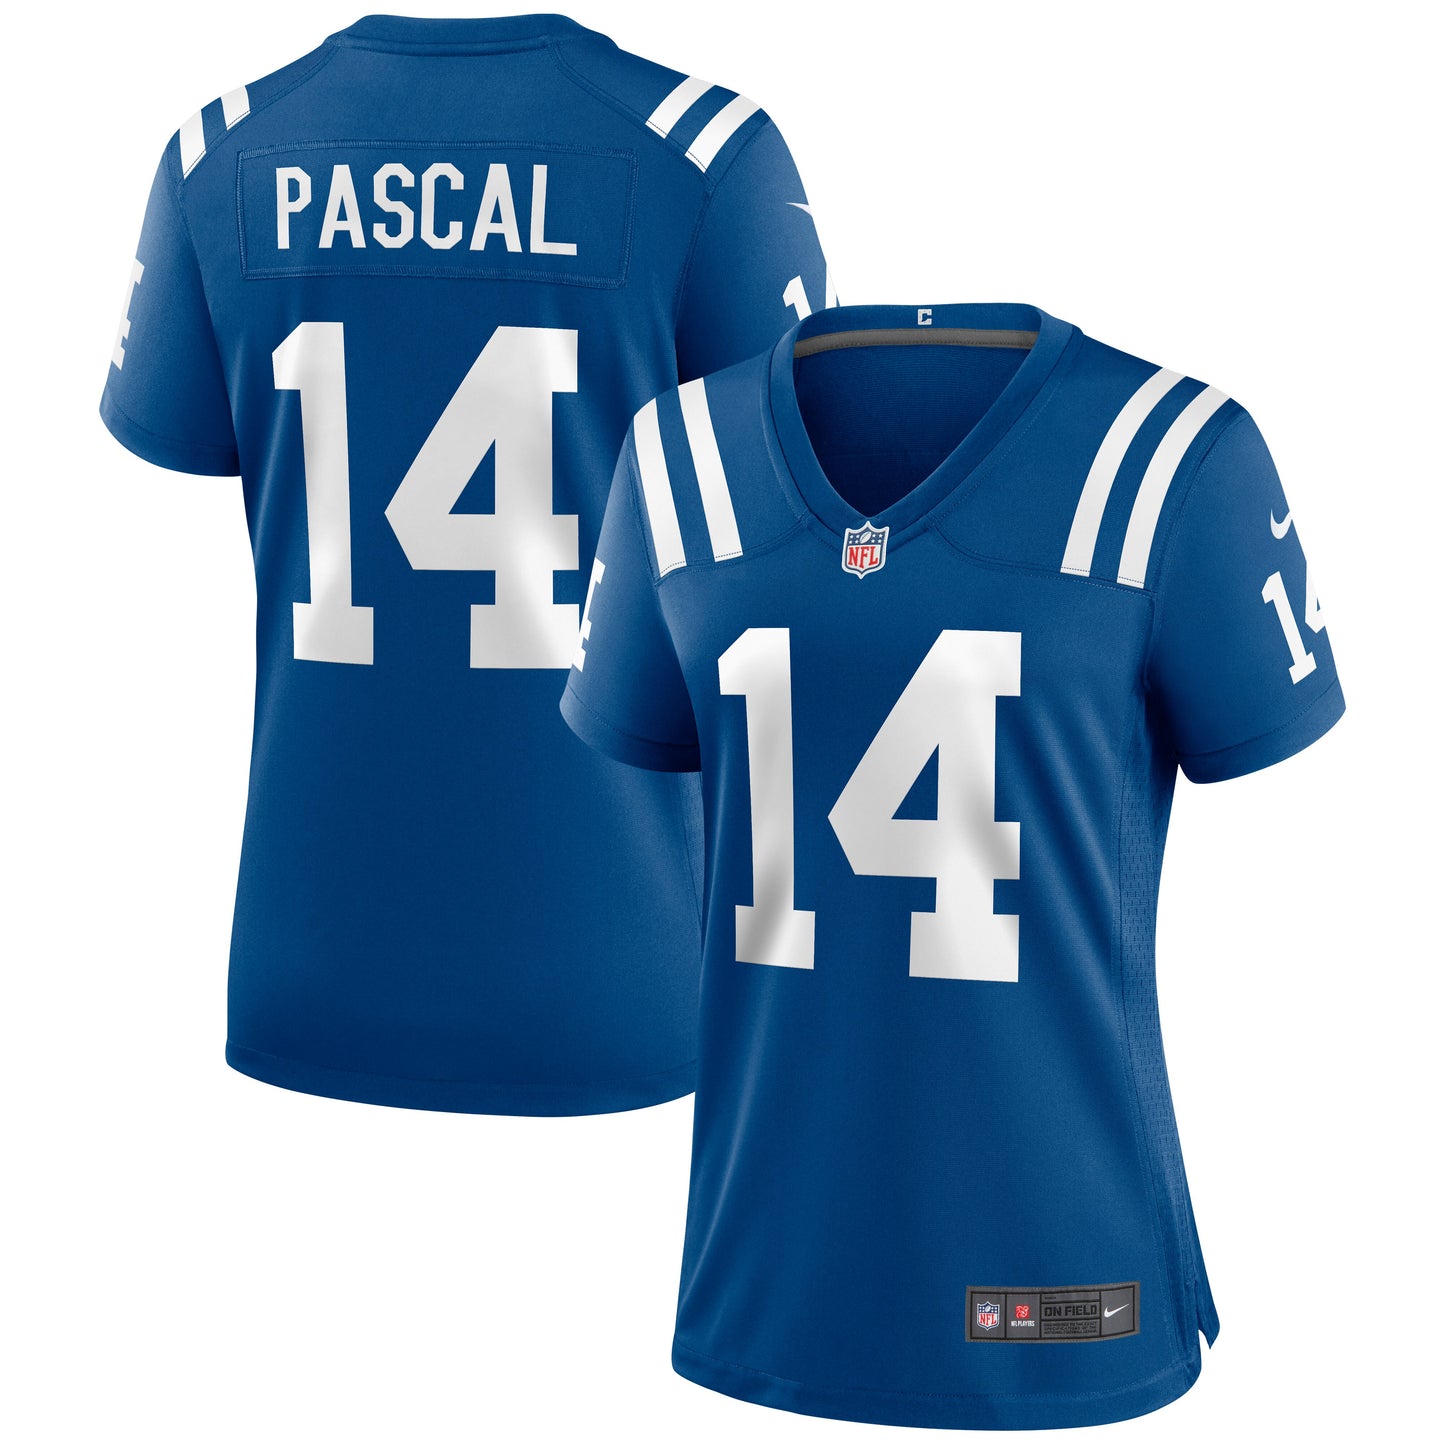 Zach Pascal Indianapolis Colts Nike Women's Game Jersey - Royal